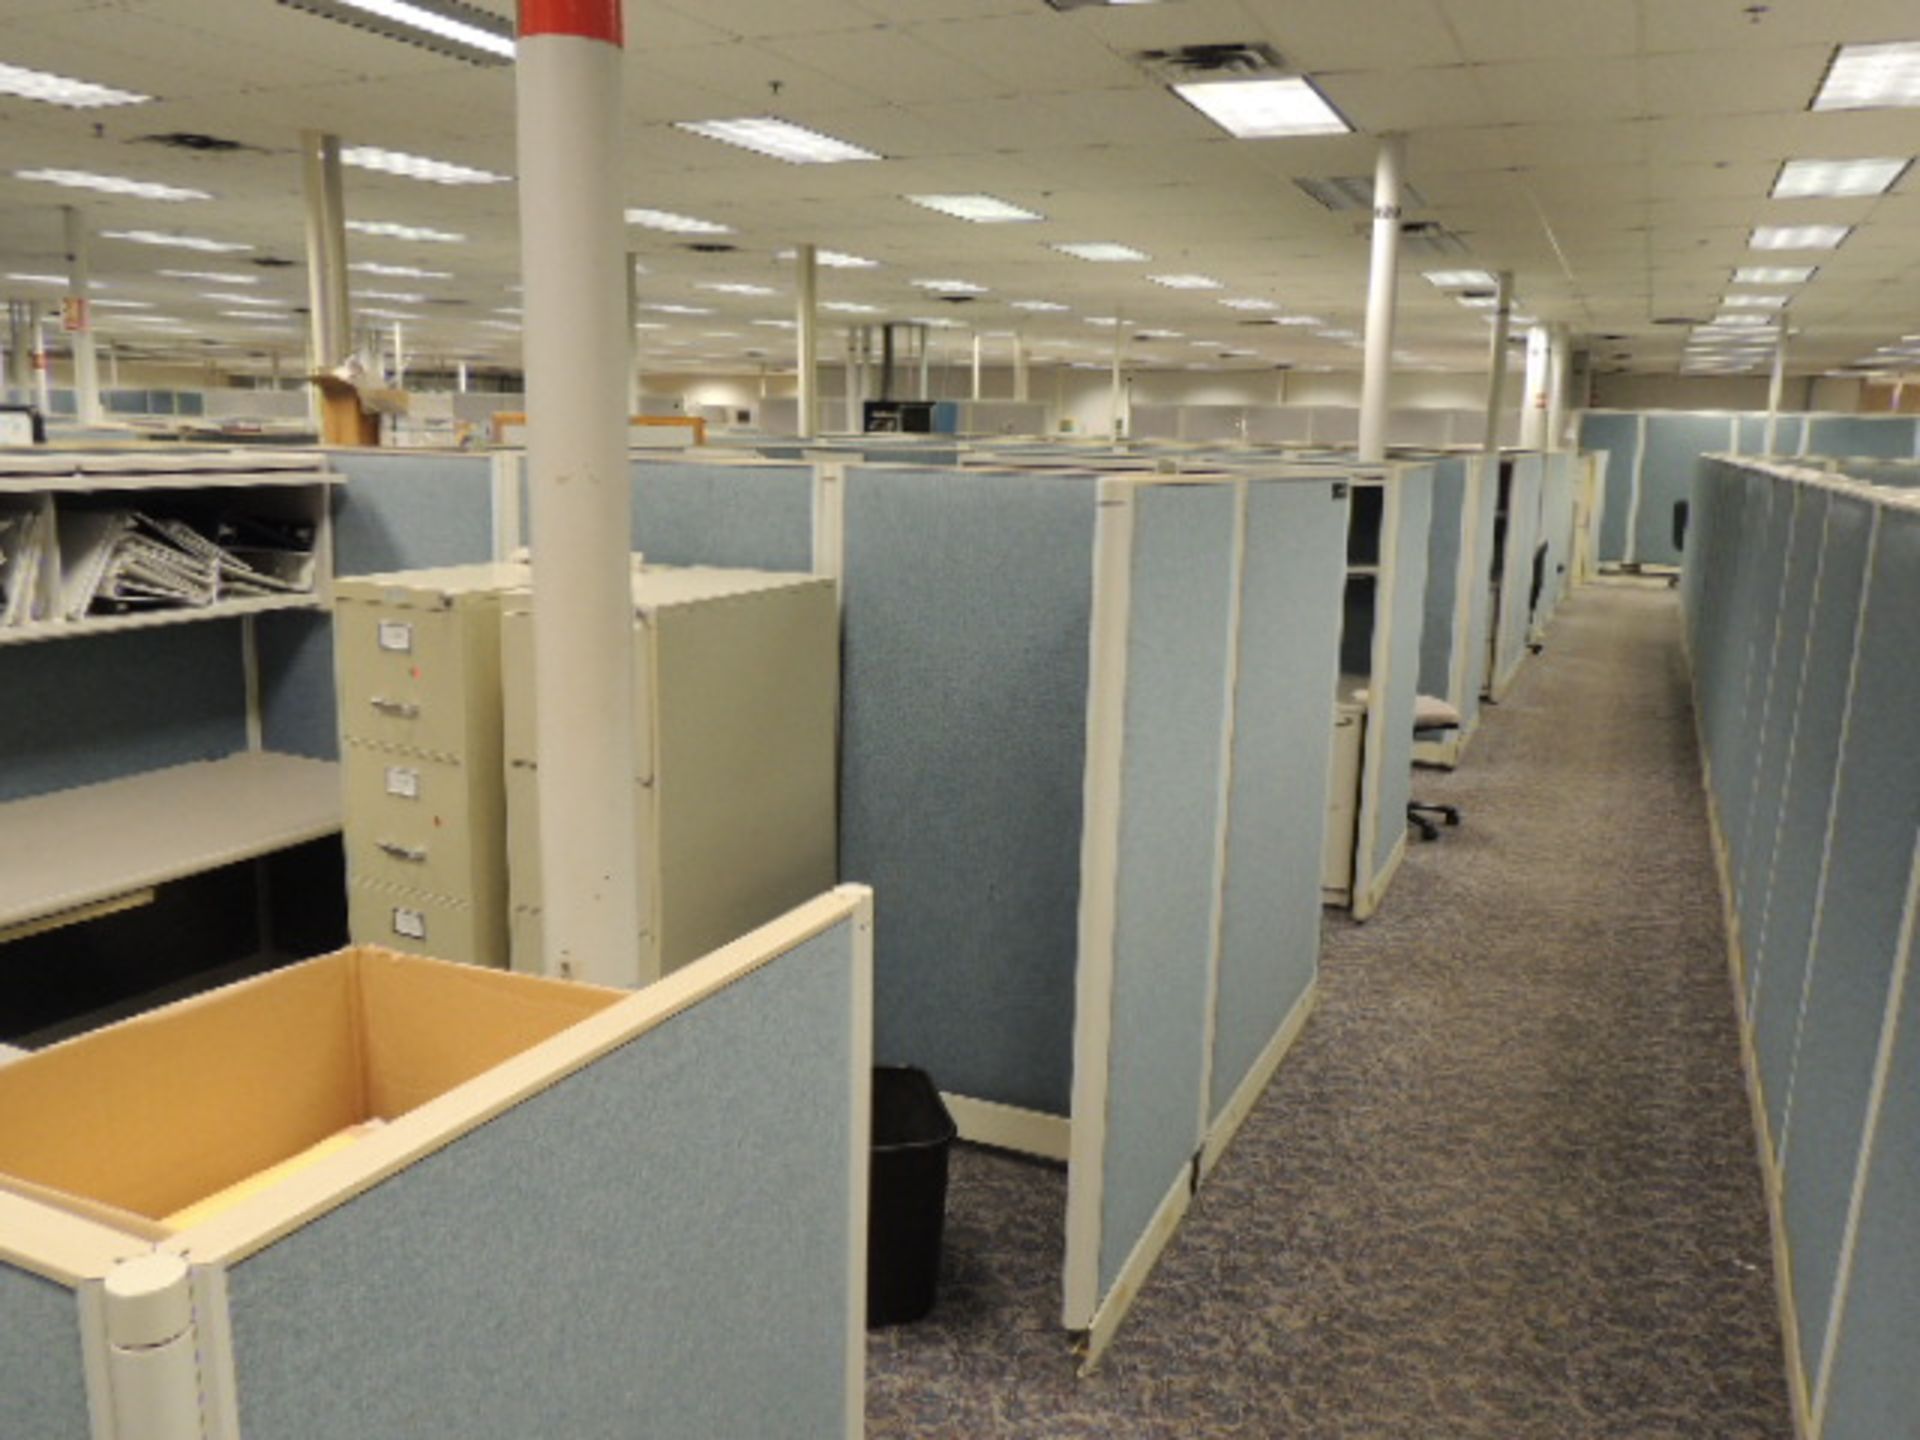 Office Cubicles & Contents. Lot: (8) offices w/ wooden and metal desks, file cabinets and lateral - Image 33 of 47